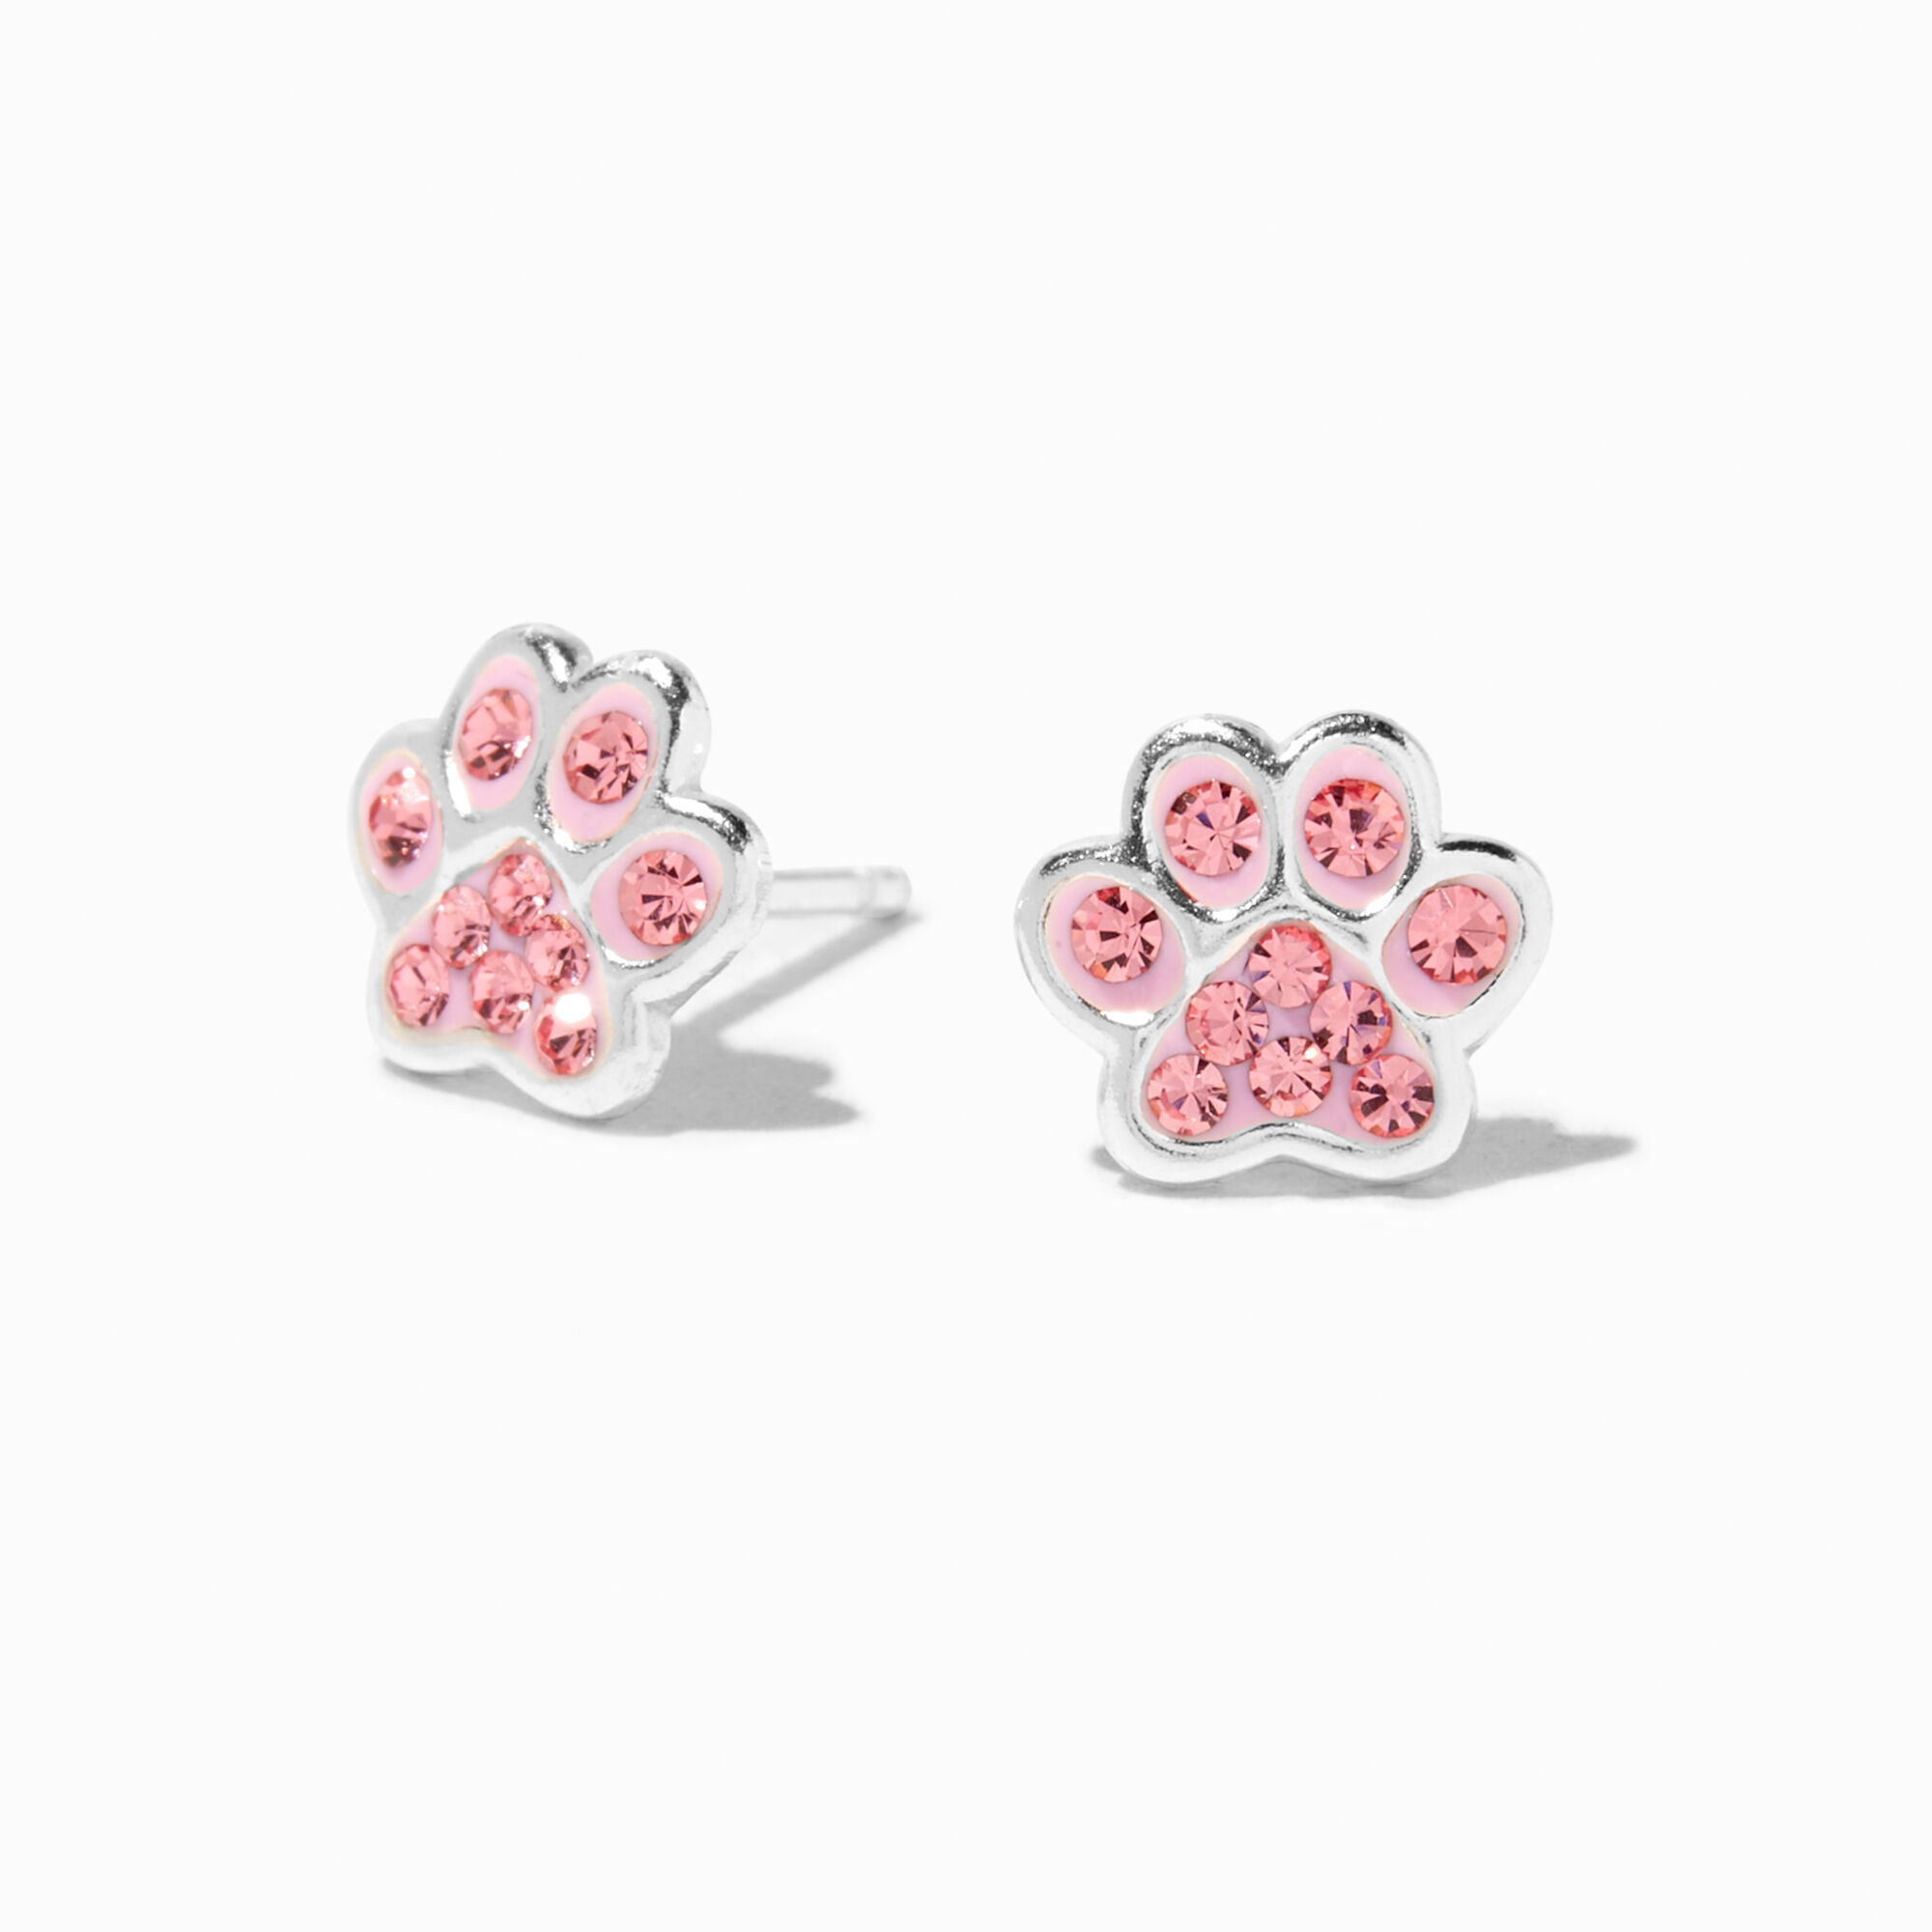 View Claires Sterling Silver Crystal Paws Stud Earrings Pink information